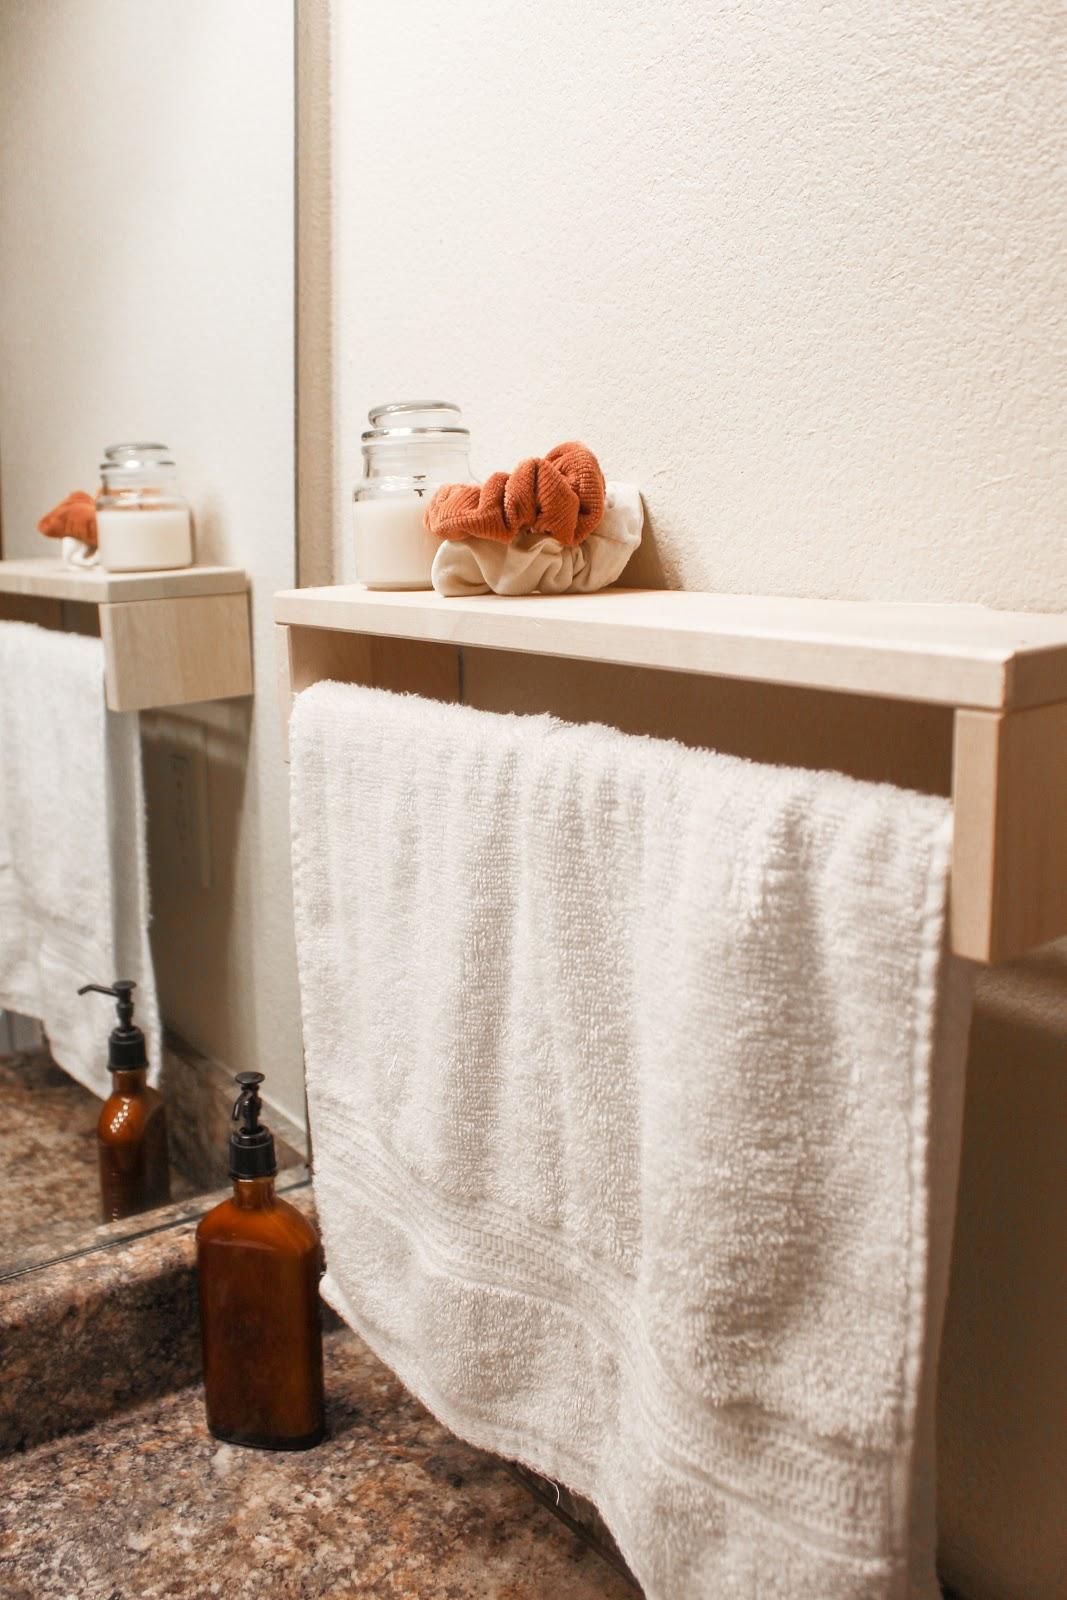 6 DIY Tips To Remodel Your Bathroom